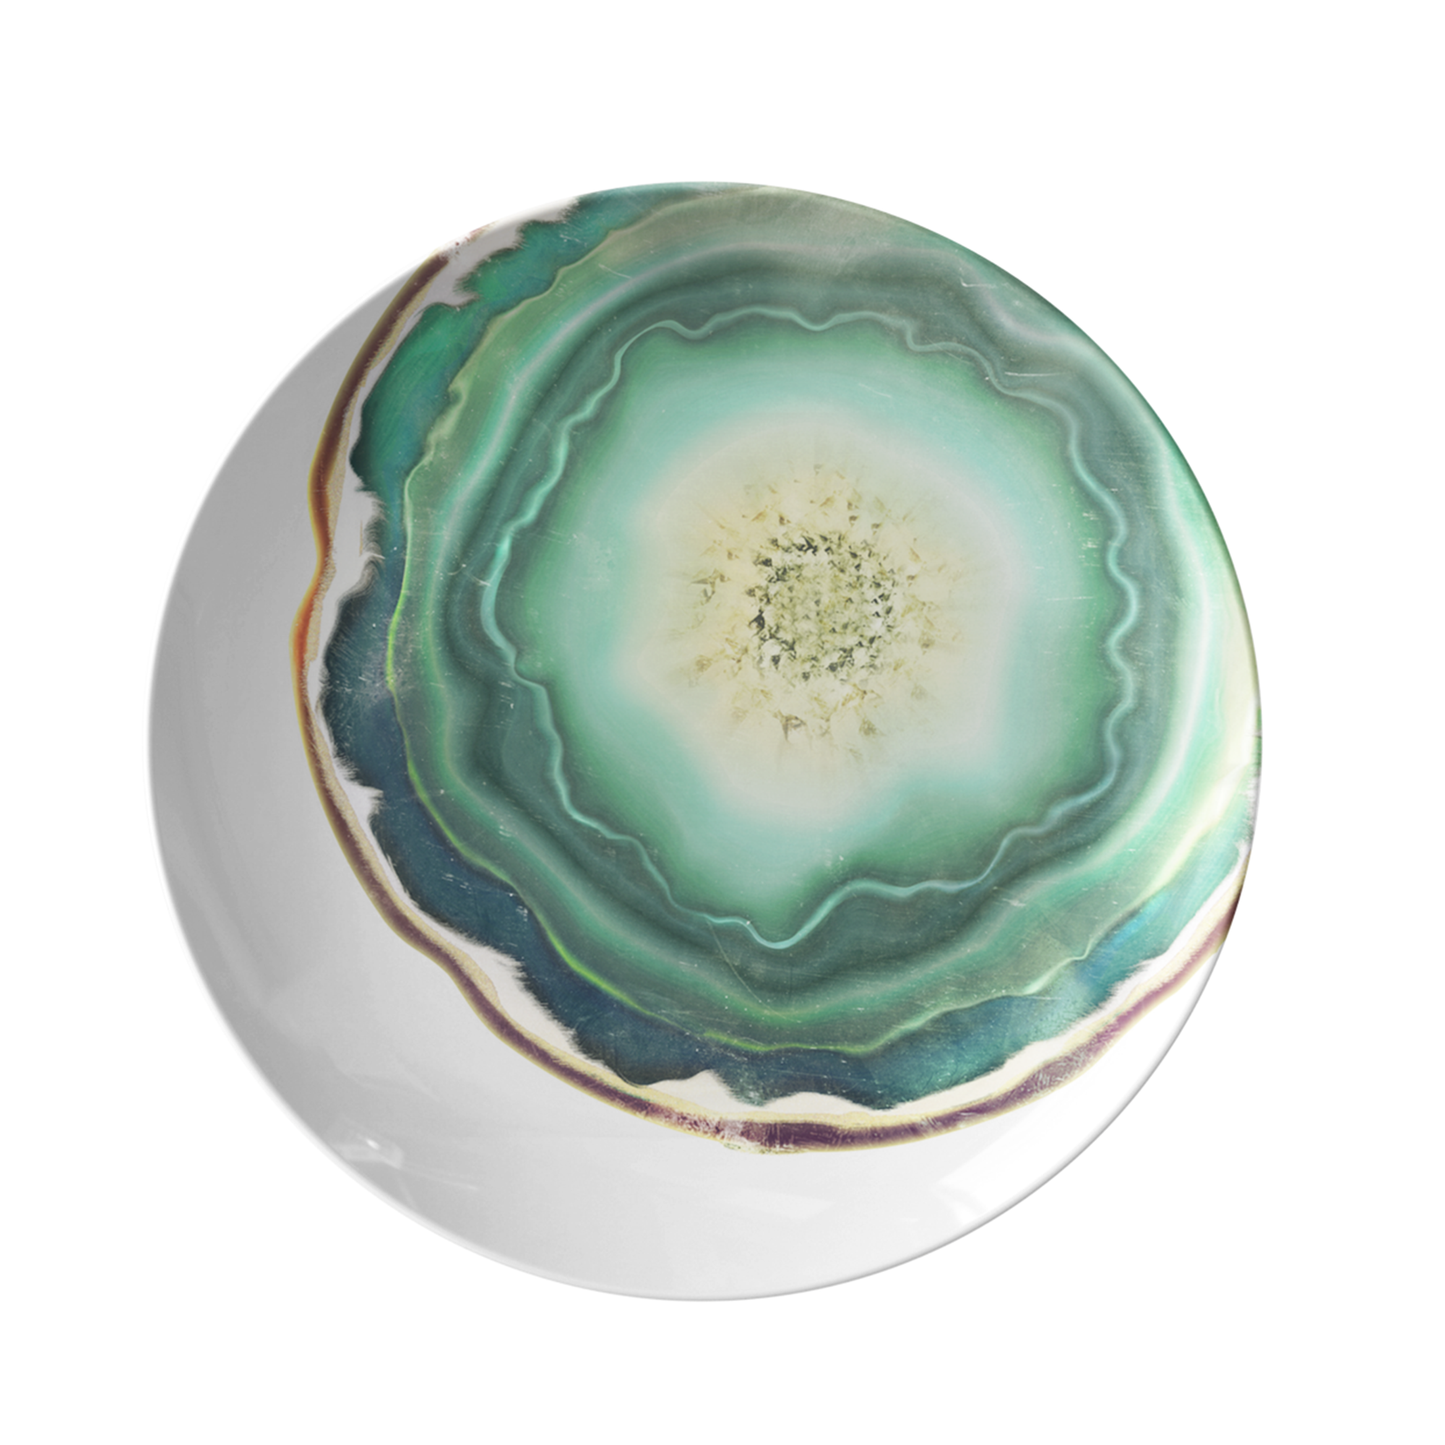 Agate Plastic Plates, Green Agate Gemstone with watercolor art print.